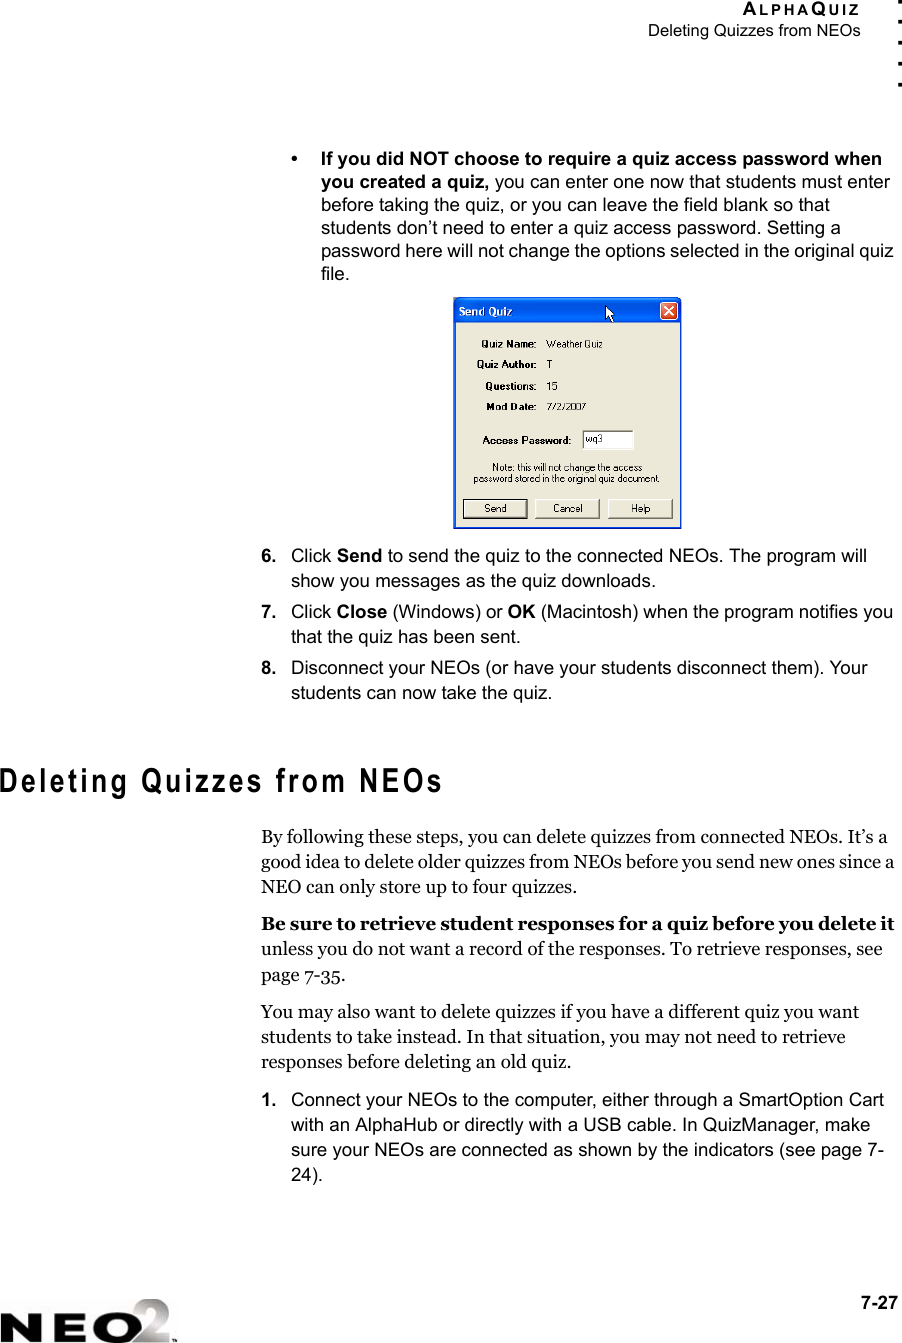 ALPHAQUIZDeleting Quizzes from NEOs7-27. . . . .• If you did NOT choose to require a quiz access password when you created a quiz, you can enter one now that students must enter before taking the quiz, or you can leave the field blank so that students don’t need to enter a quiz access password. Setting a password here will not change the options selected in the original quiz file.6. Click Send to send the quiz to the connected NEOs. The program will show you messages as the quiz downloads.7. Click Close (Windows) or OK (Macintosh) when the program notifies you that the quiz has been sent.8. Disconnect your NEOs (or have your students disconnect them). Your students can now take the quiz.Deleting Quizzes from NEOsBy following these steps, you can delete quizzes from connected NEOs. It’s a good idea to delete older quizzes from NEOs before you send new ones since a NEO can only store up to four quizzes.Be sure to retrieve student responses for a quiz before you delete it unless you do not want a record of the responses. To retrieve responses, see page 7-35.You may also want to delete quizzes if you have a different quiz you want students to take instead. In that situation, you may not need to retrieve responses before deleting an old quiz.1. Connect your NEOs to the computer, either through a SmartOption Cart with an AlphaHub or directly with a USB cable. In QuizManager, make sure your NEOs are connected as shown by the indicators (see page 7-24).